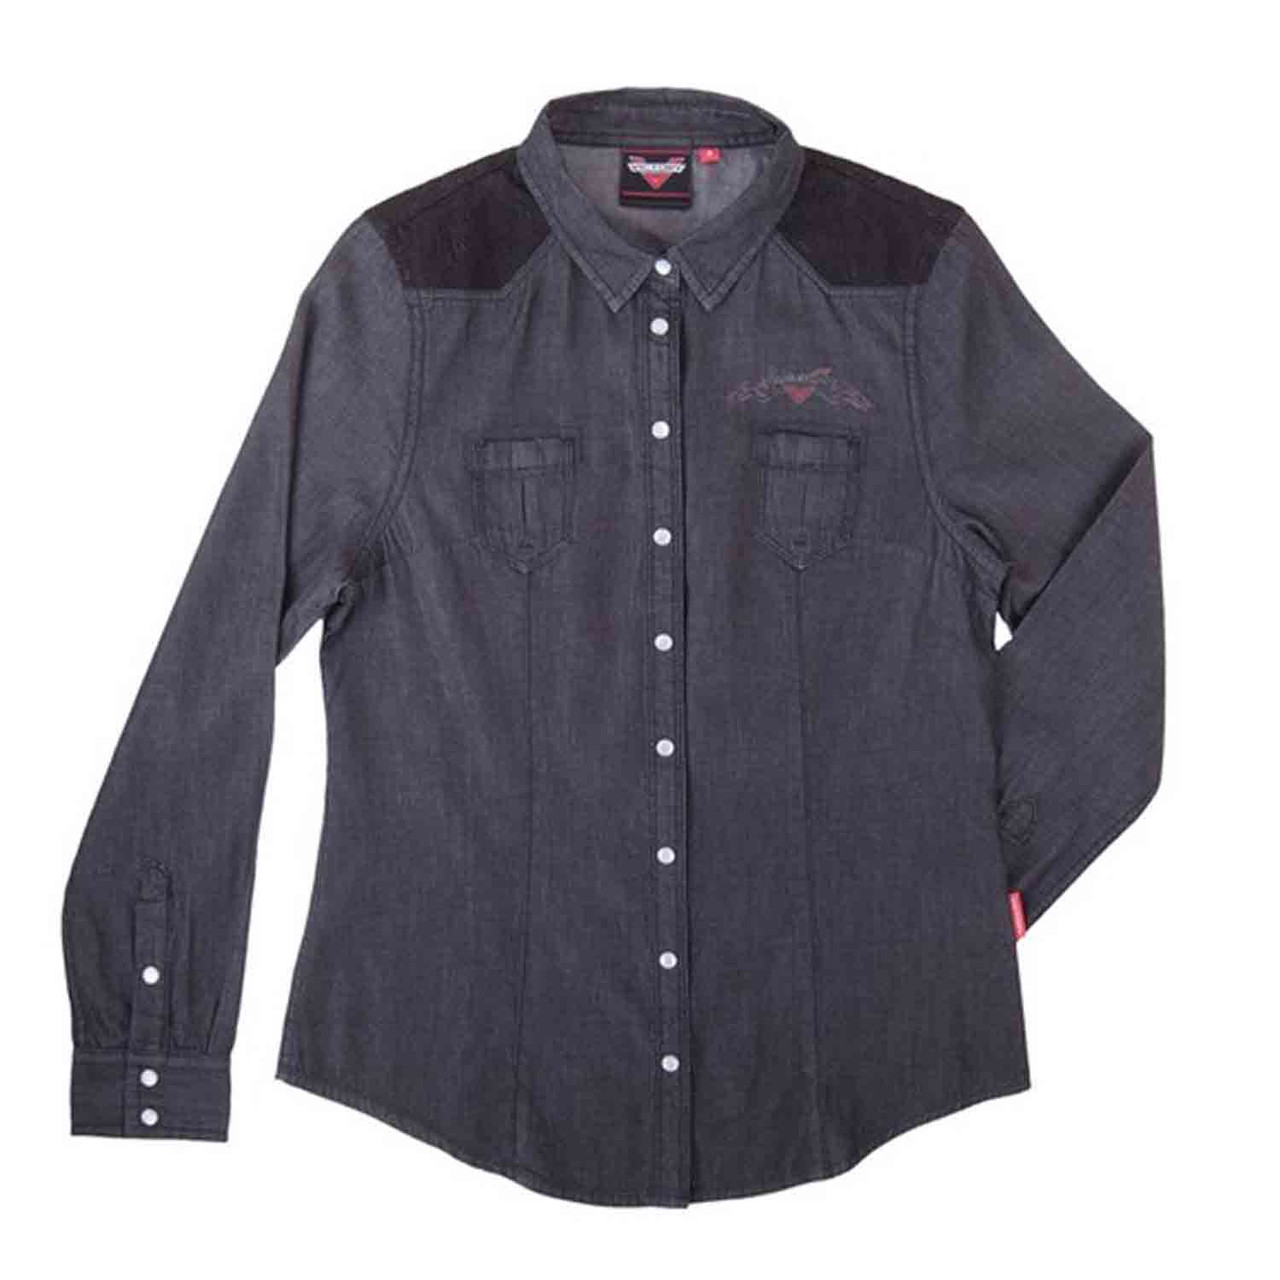 Victory Motorcycle New OEM Women's Black Chambray Shirt, Small, 286439702